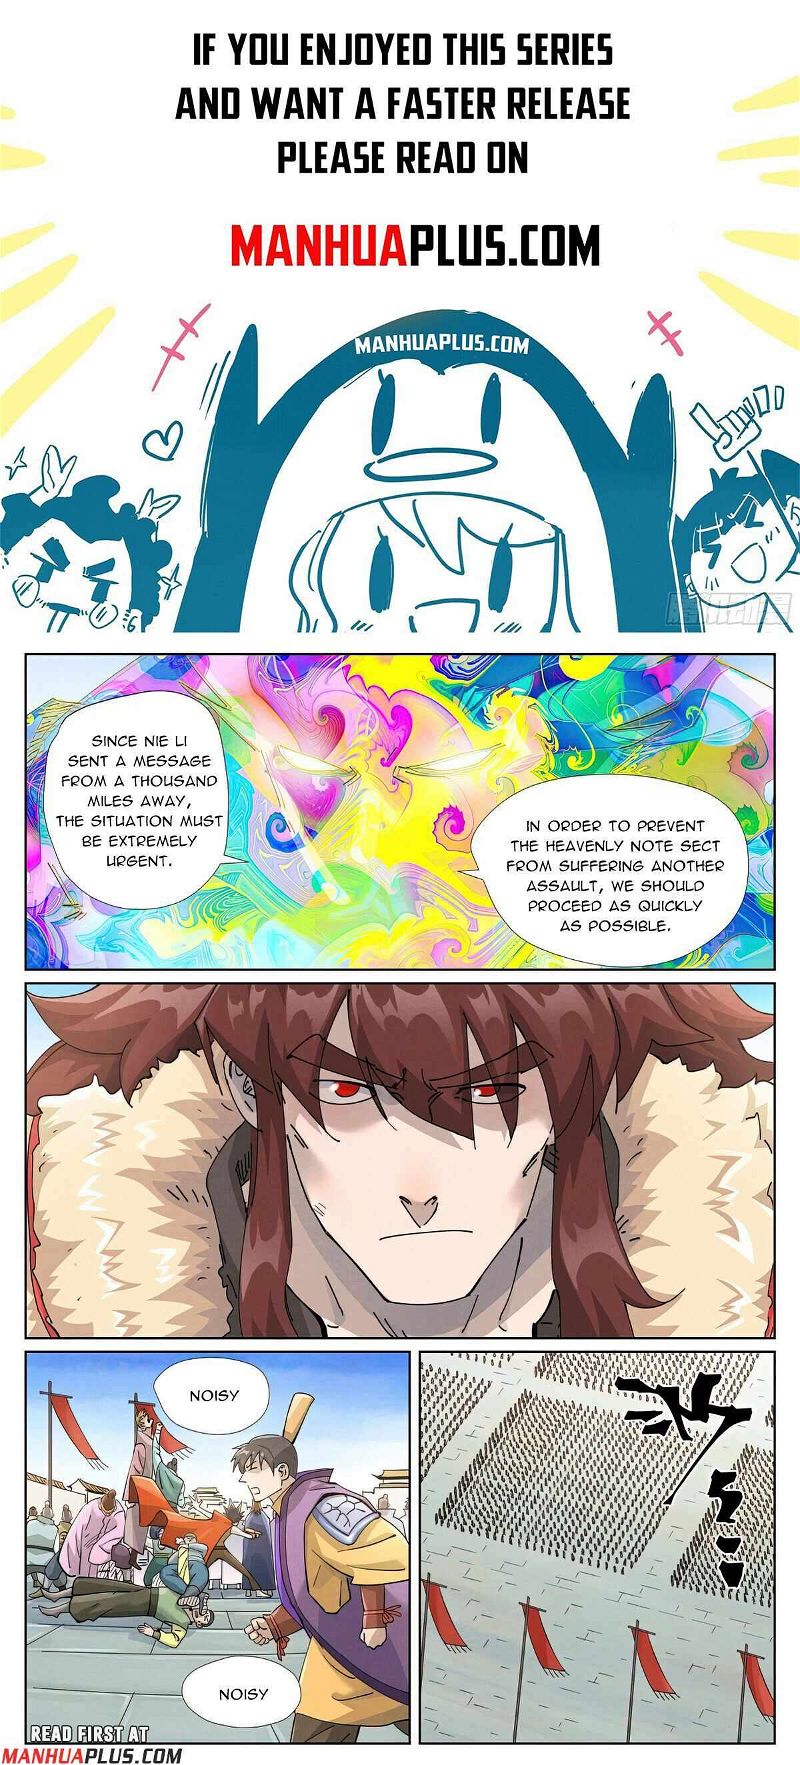 Tales of Demons and Gods - Chapter 116 Battle At The Corn Field